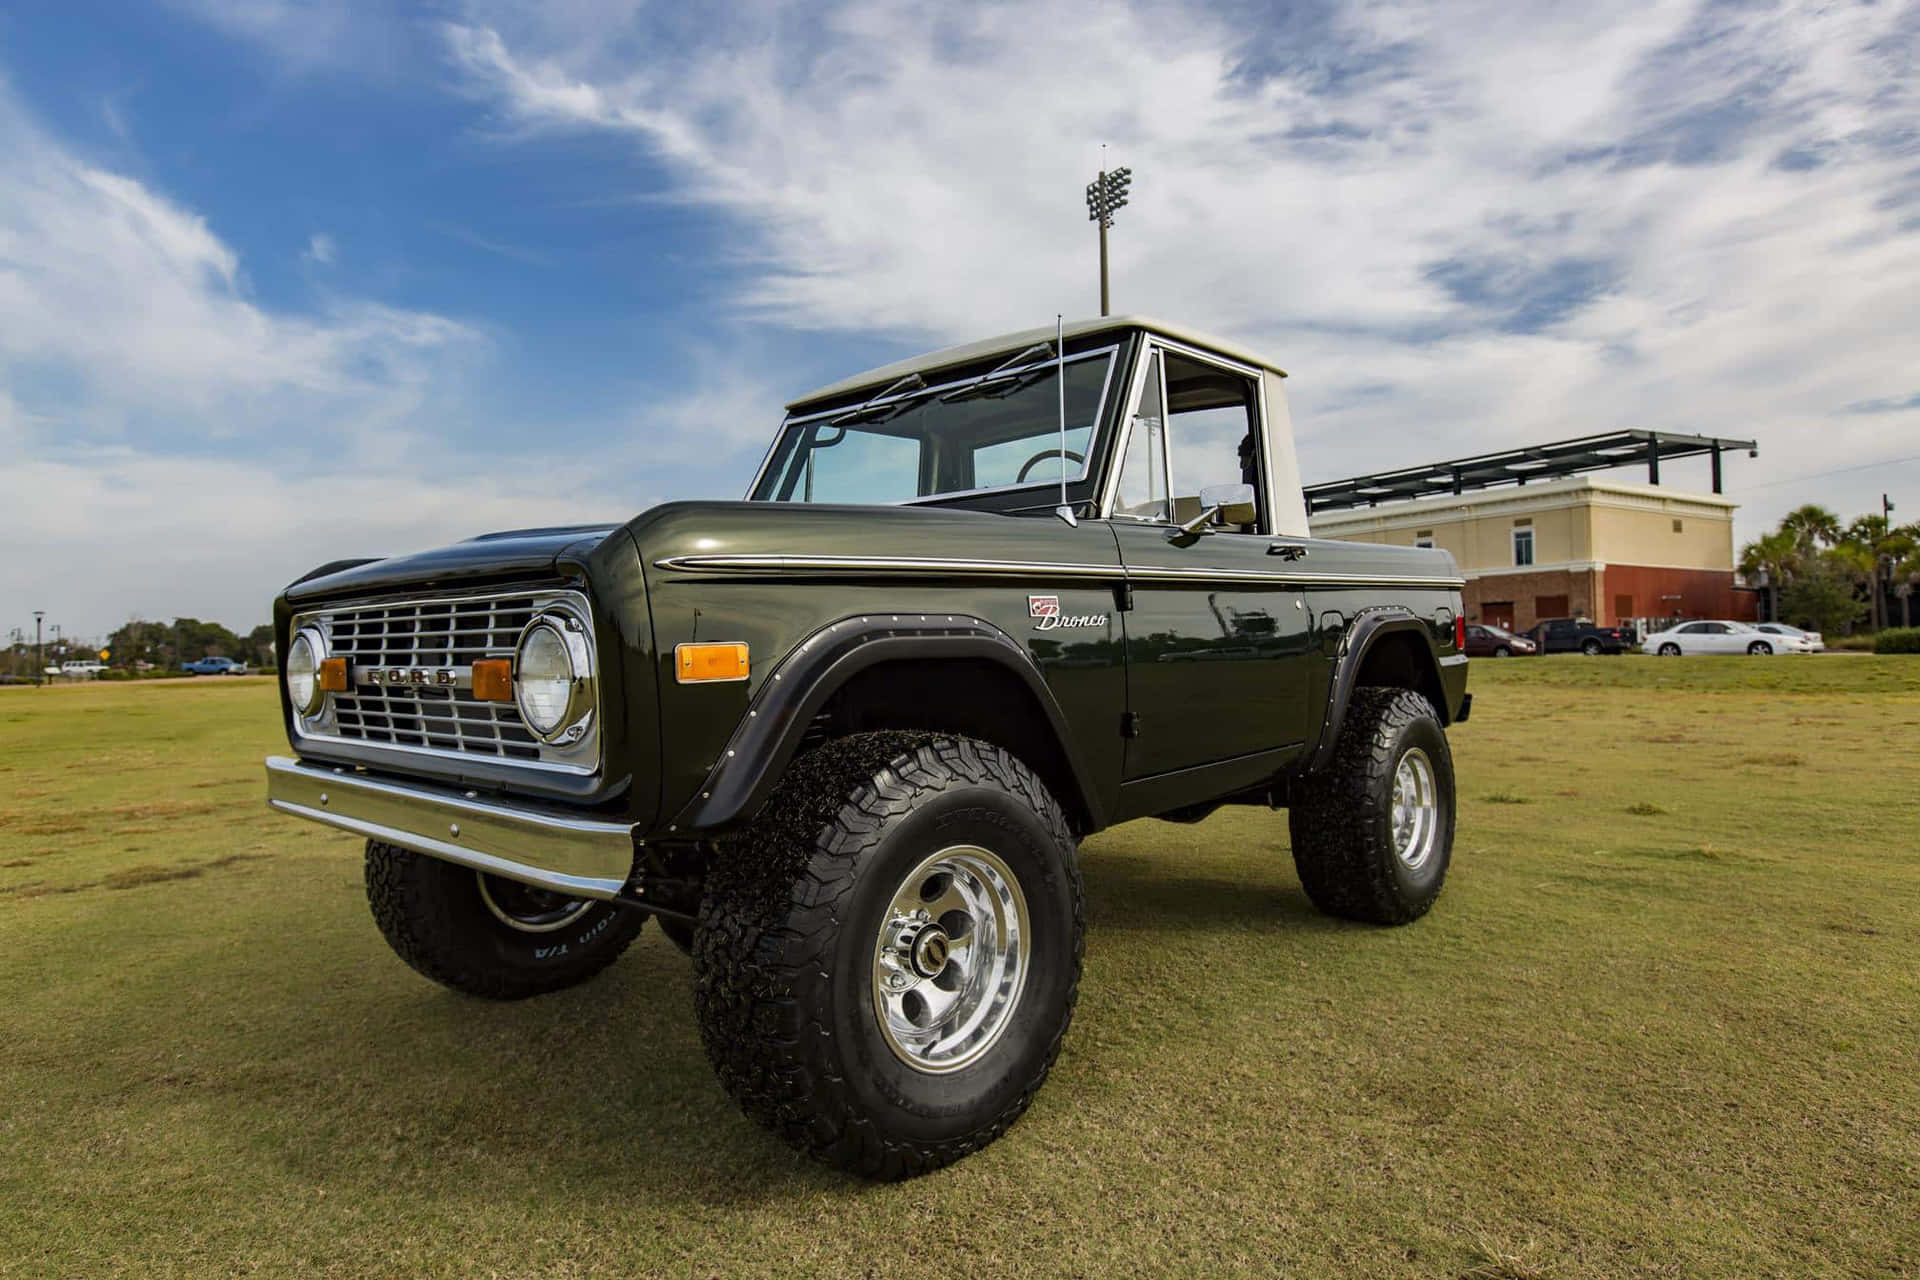 Experience off-road excitement with the iconic Ford Bronco